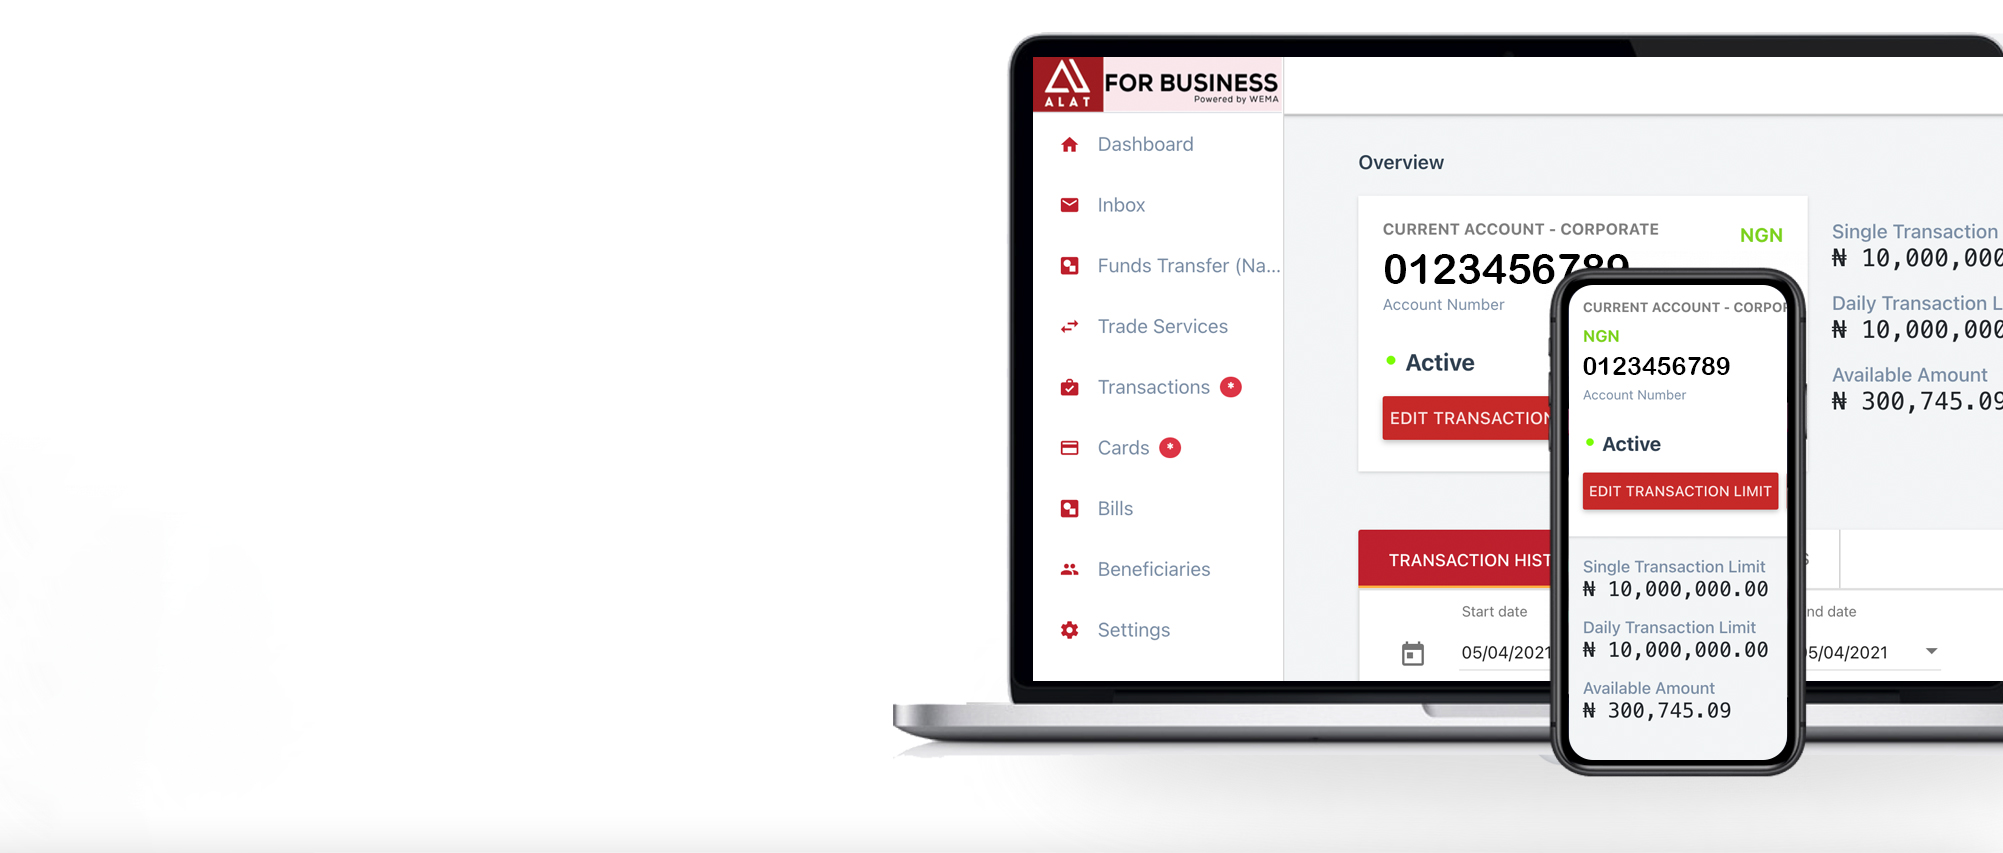 Open a Business account on alat by wema